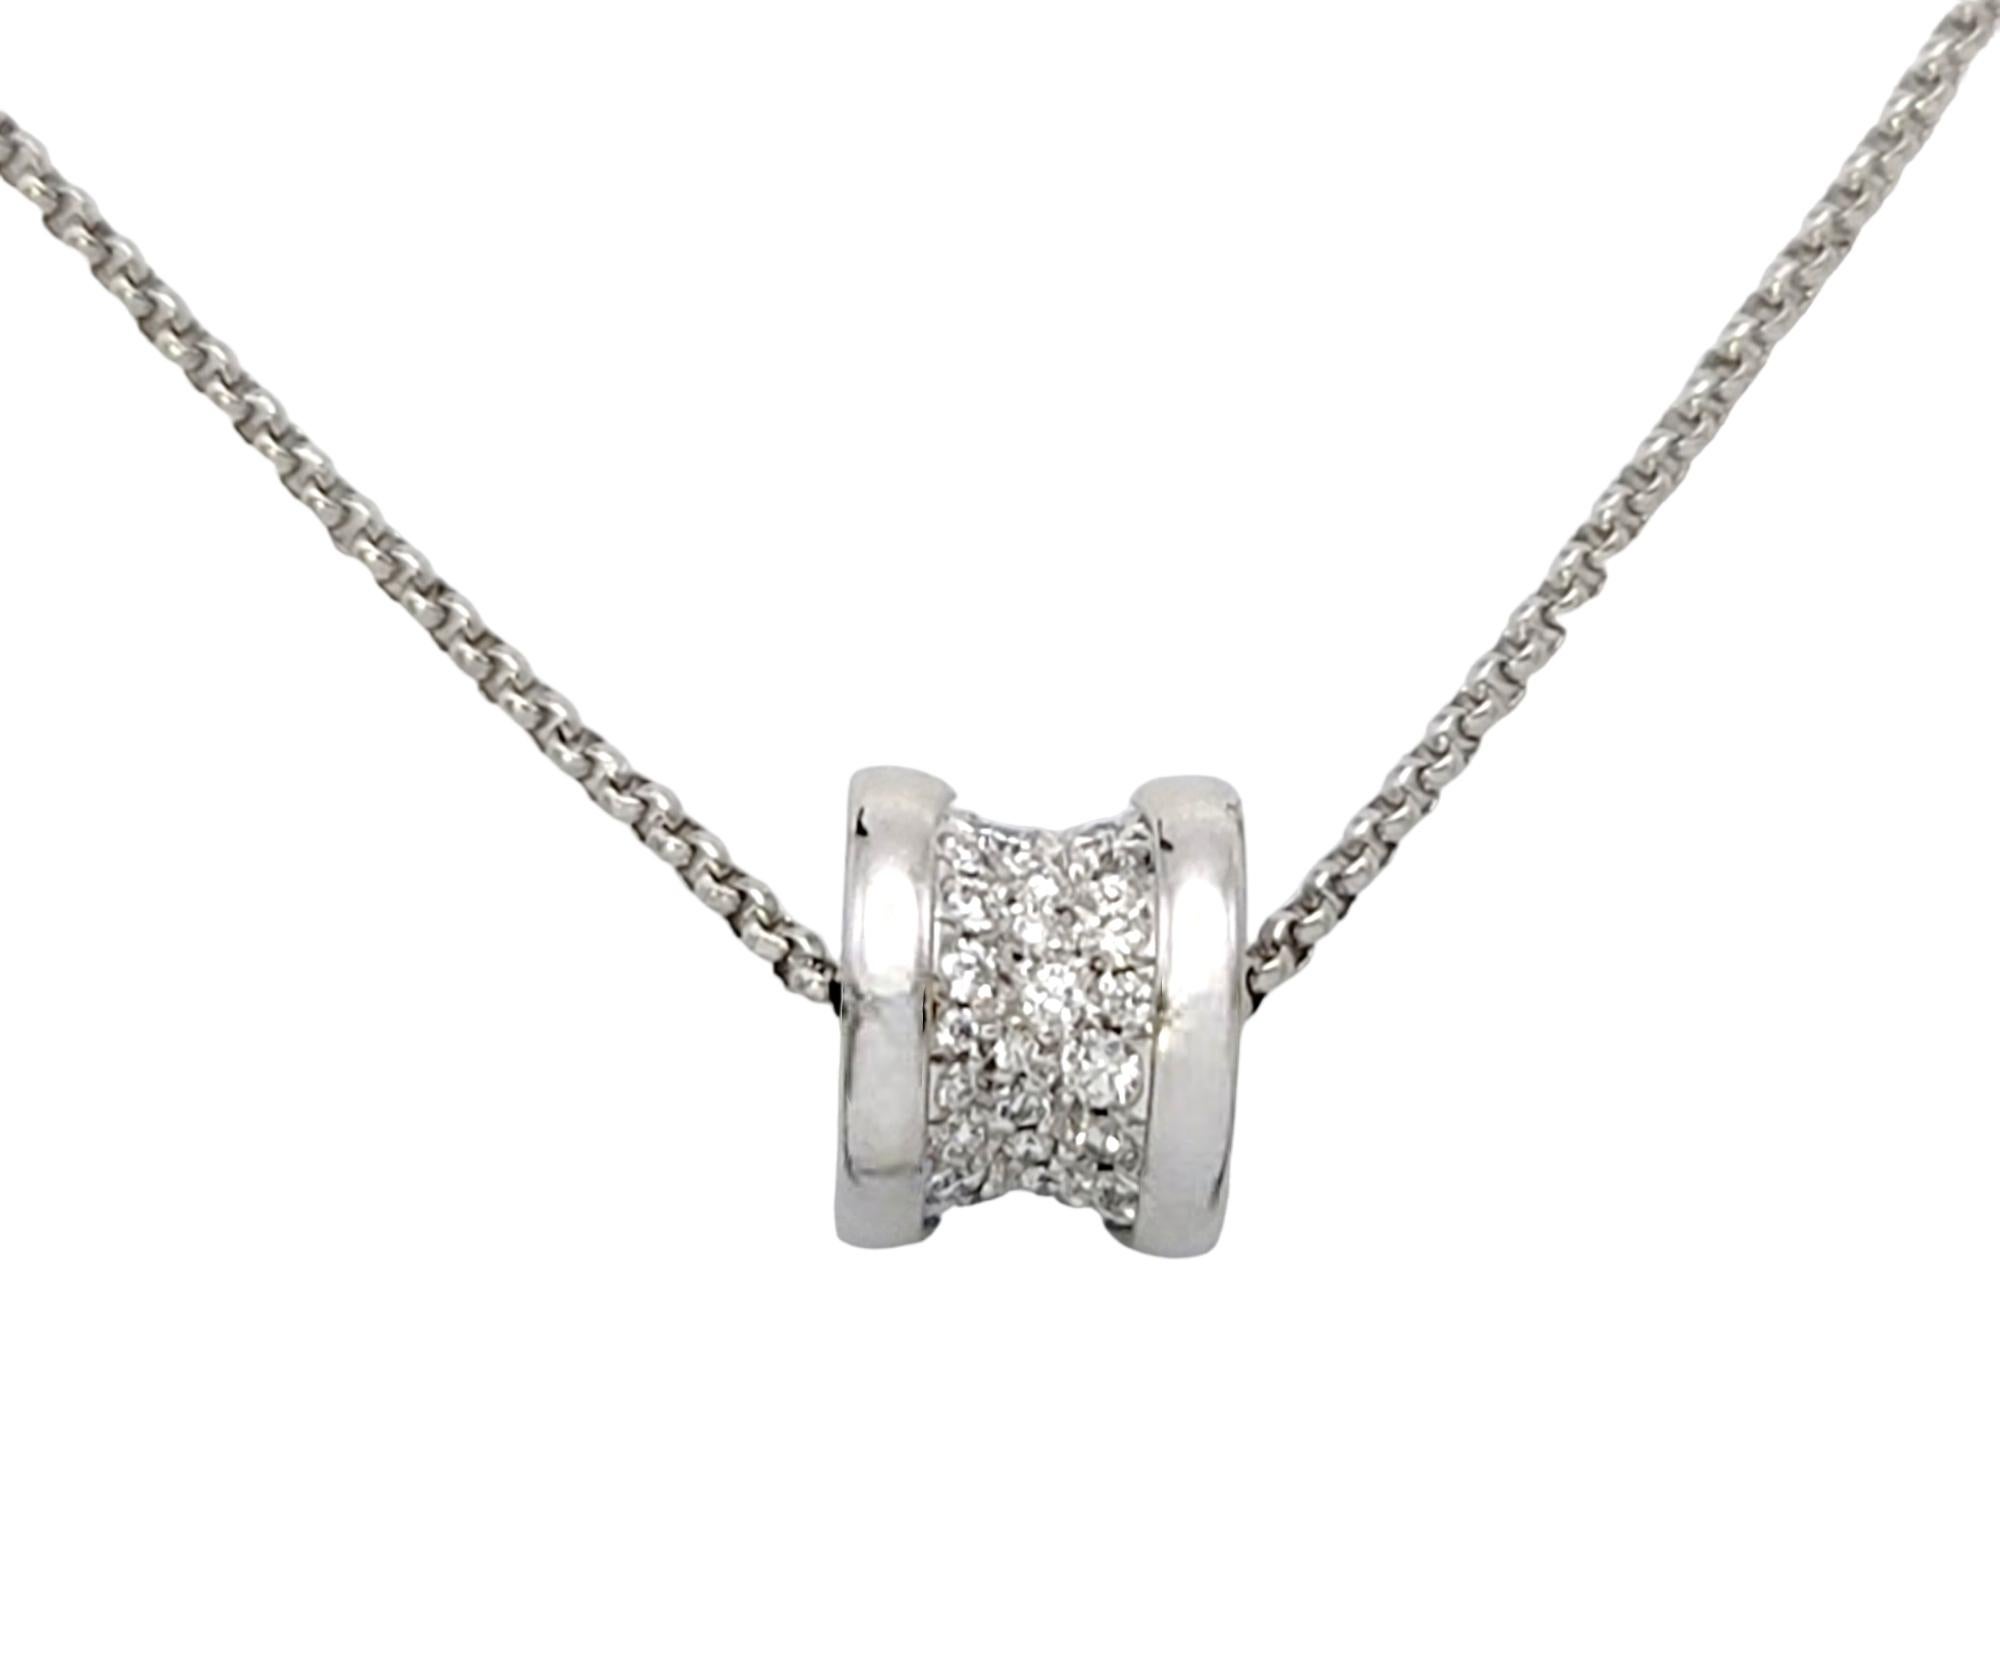 Lovely contemporary diamond pendant necklace by renowned designer, Bulgari. Bulgari is an Italian high-end luxury fashion house founded in 1884 and known for its jewelry, watches, fragrances, accessories, and leather goods.

This beautiful necklace